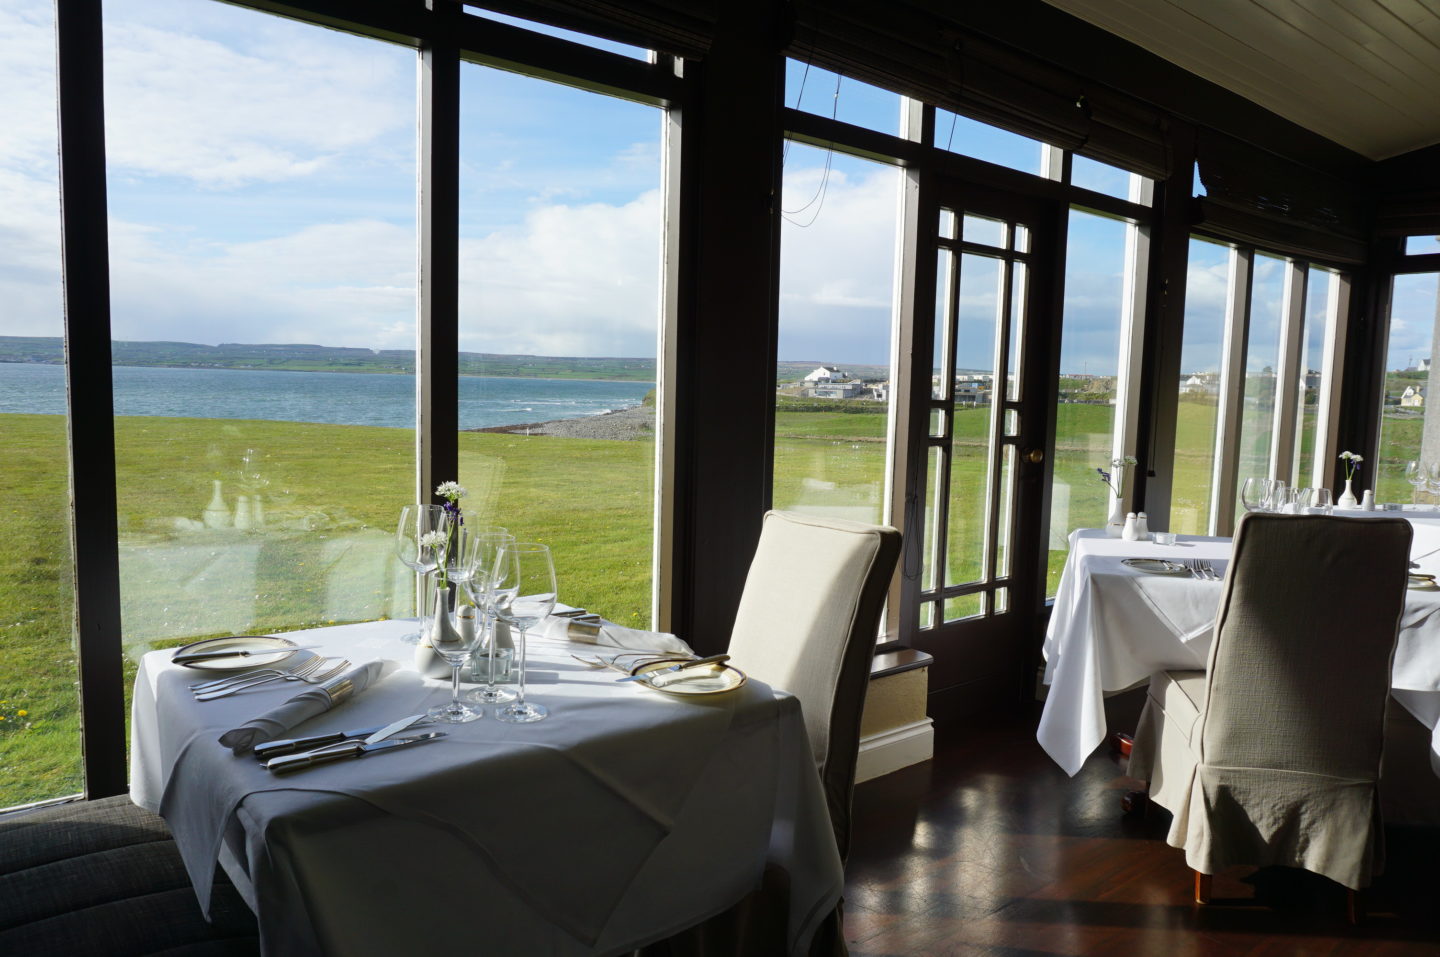 Moy House restaurant with a view